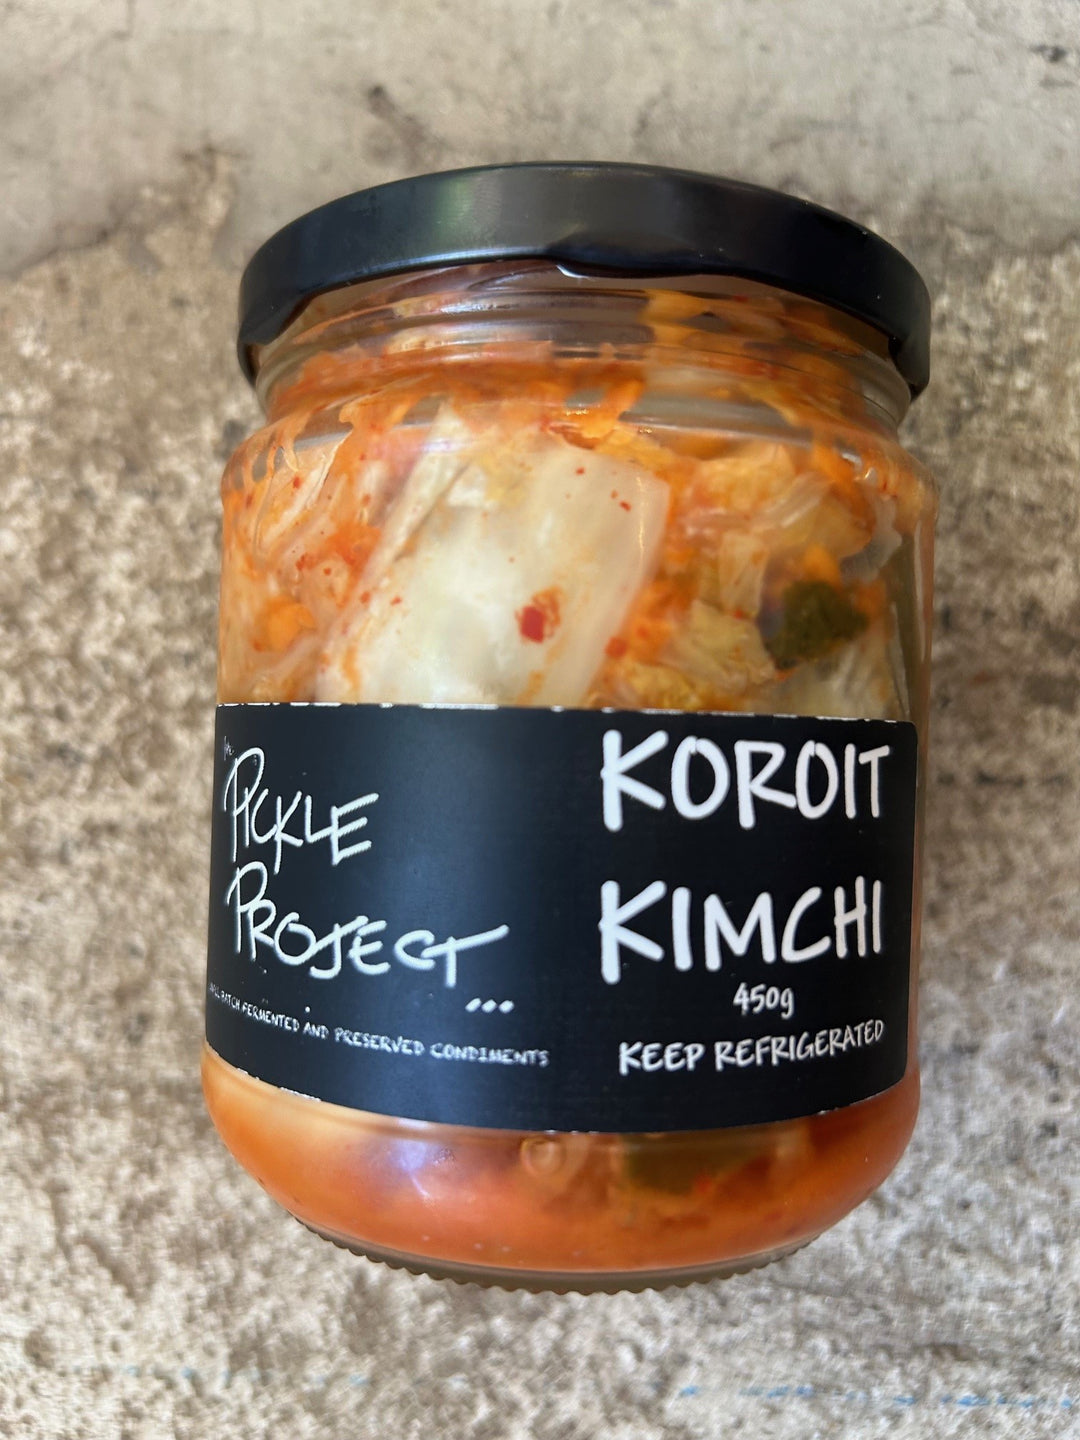 The Pickle Project Koroit Kimchi